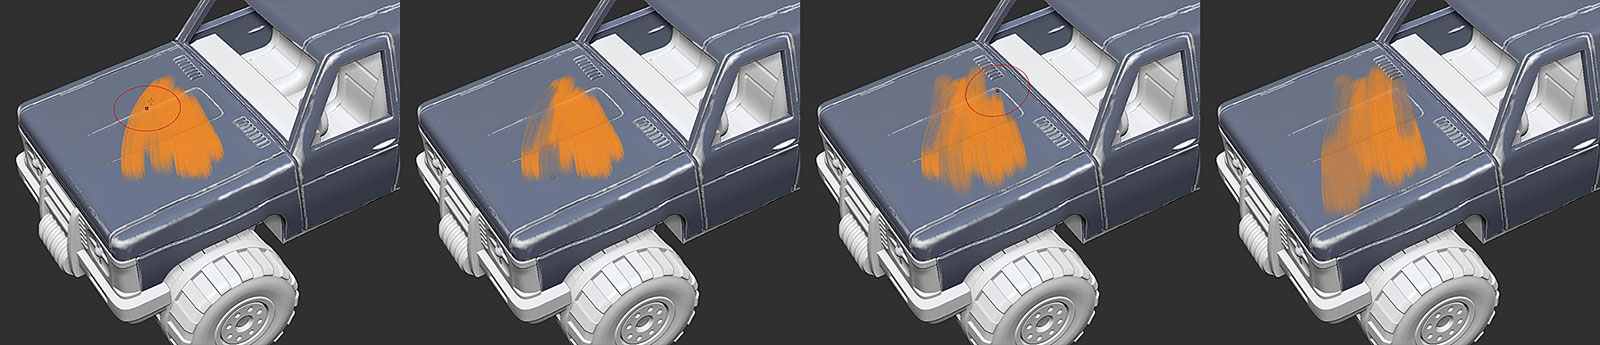 zbrush features alphastreaks